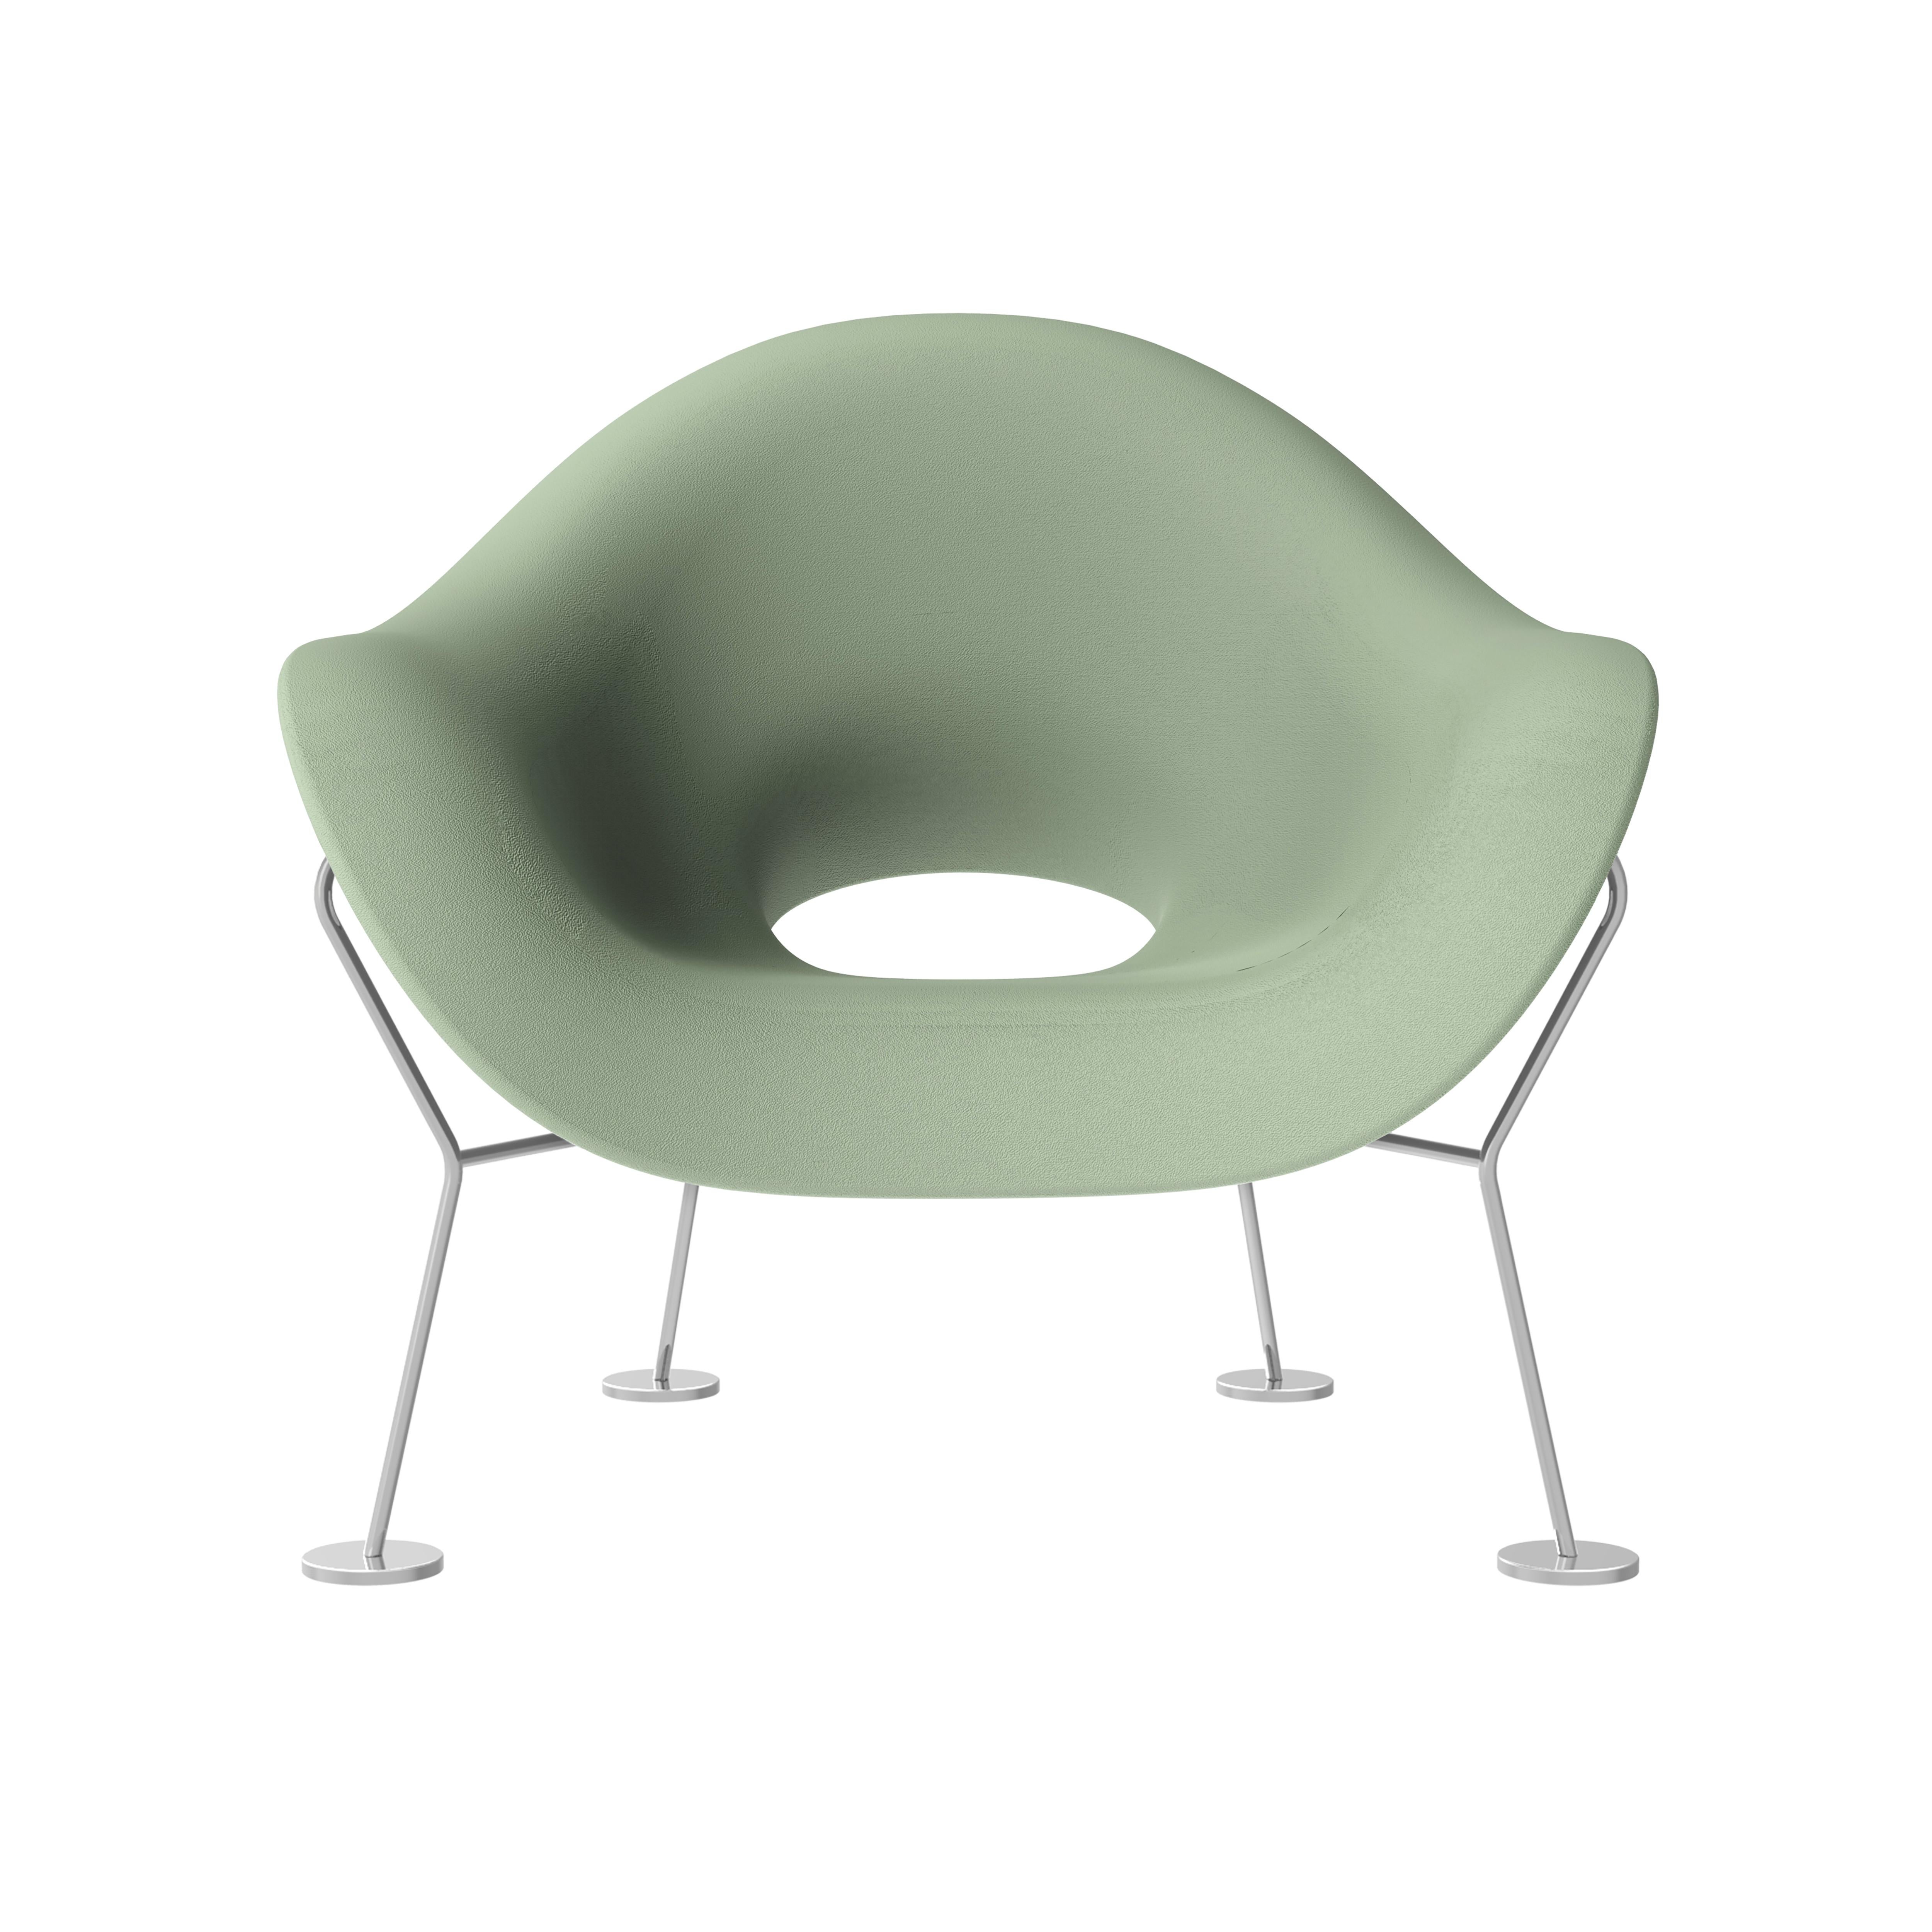 For Sale: Green (Balsam Green) Plush Modern Black Side or Arm Chair with Chrome Legs by Andrea Branzi